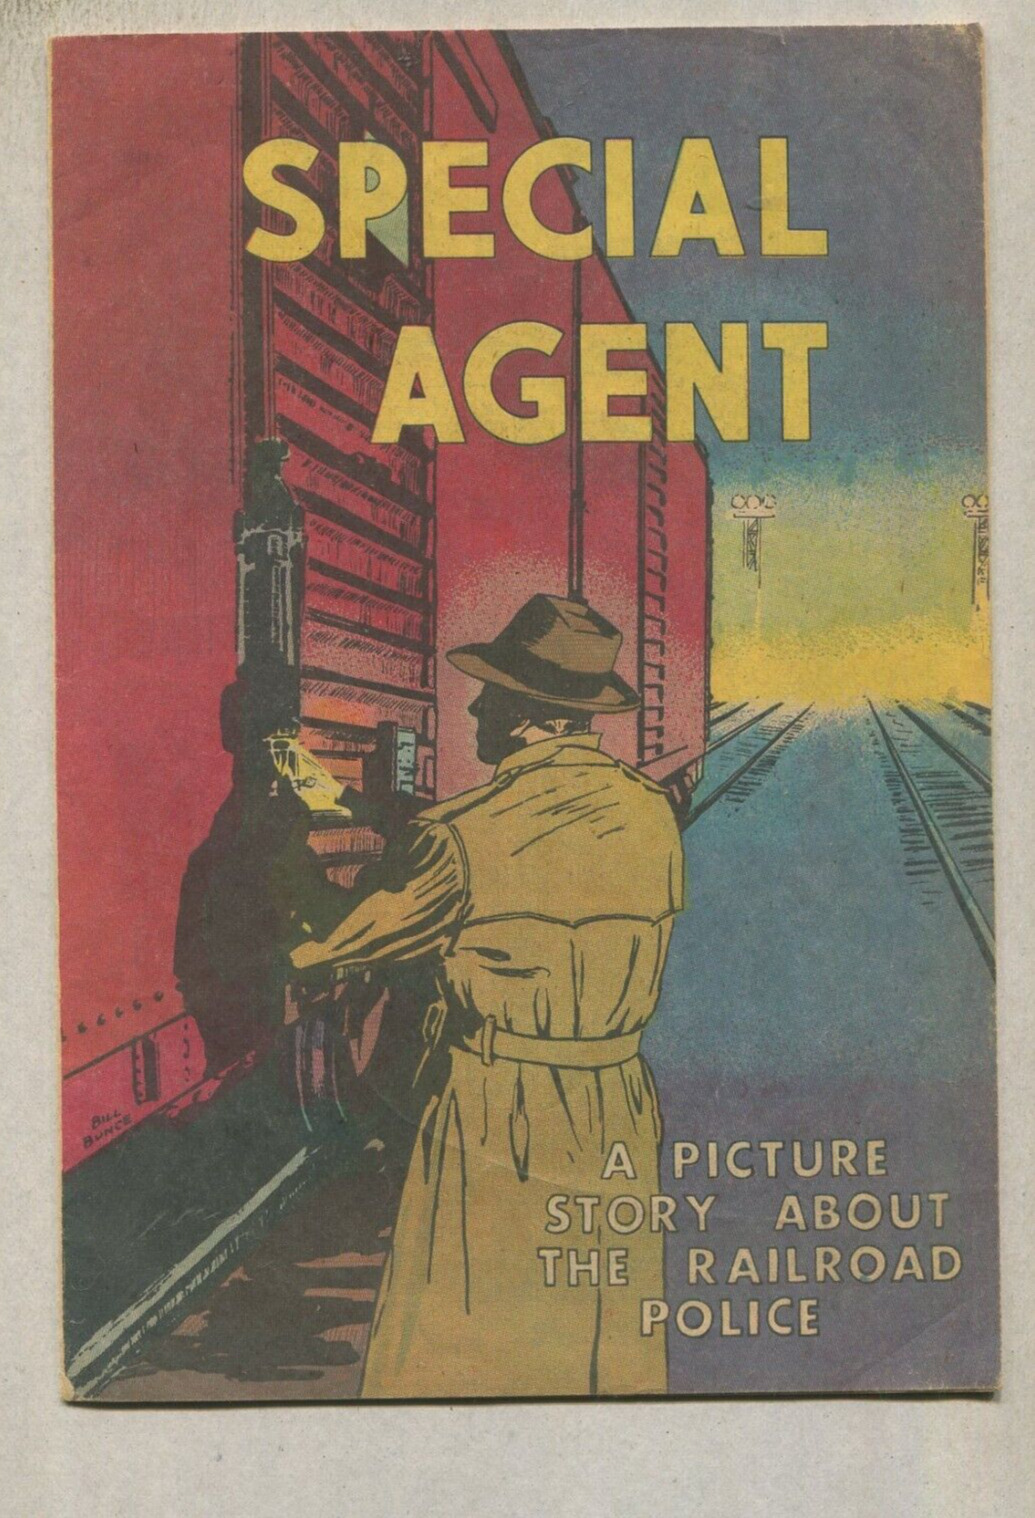 Special Agent -Story About The Railroad Police  Promo 1959  SA